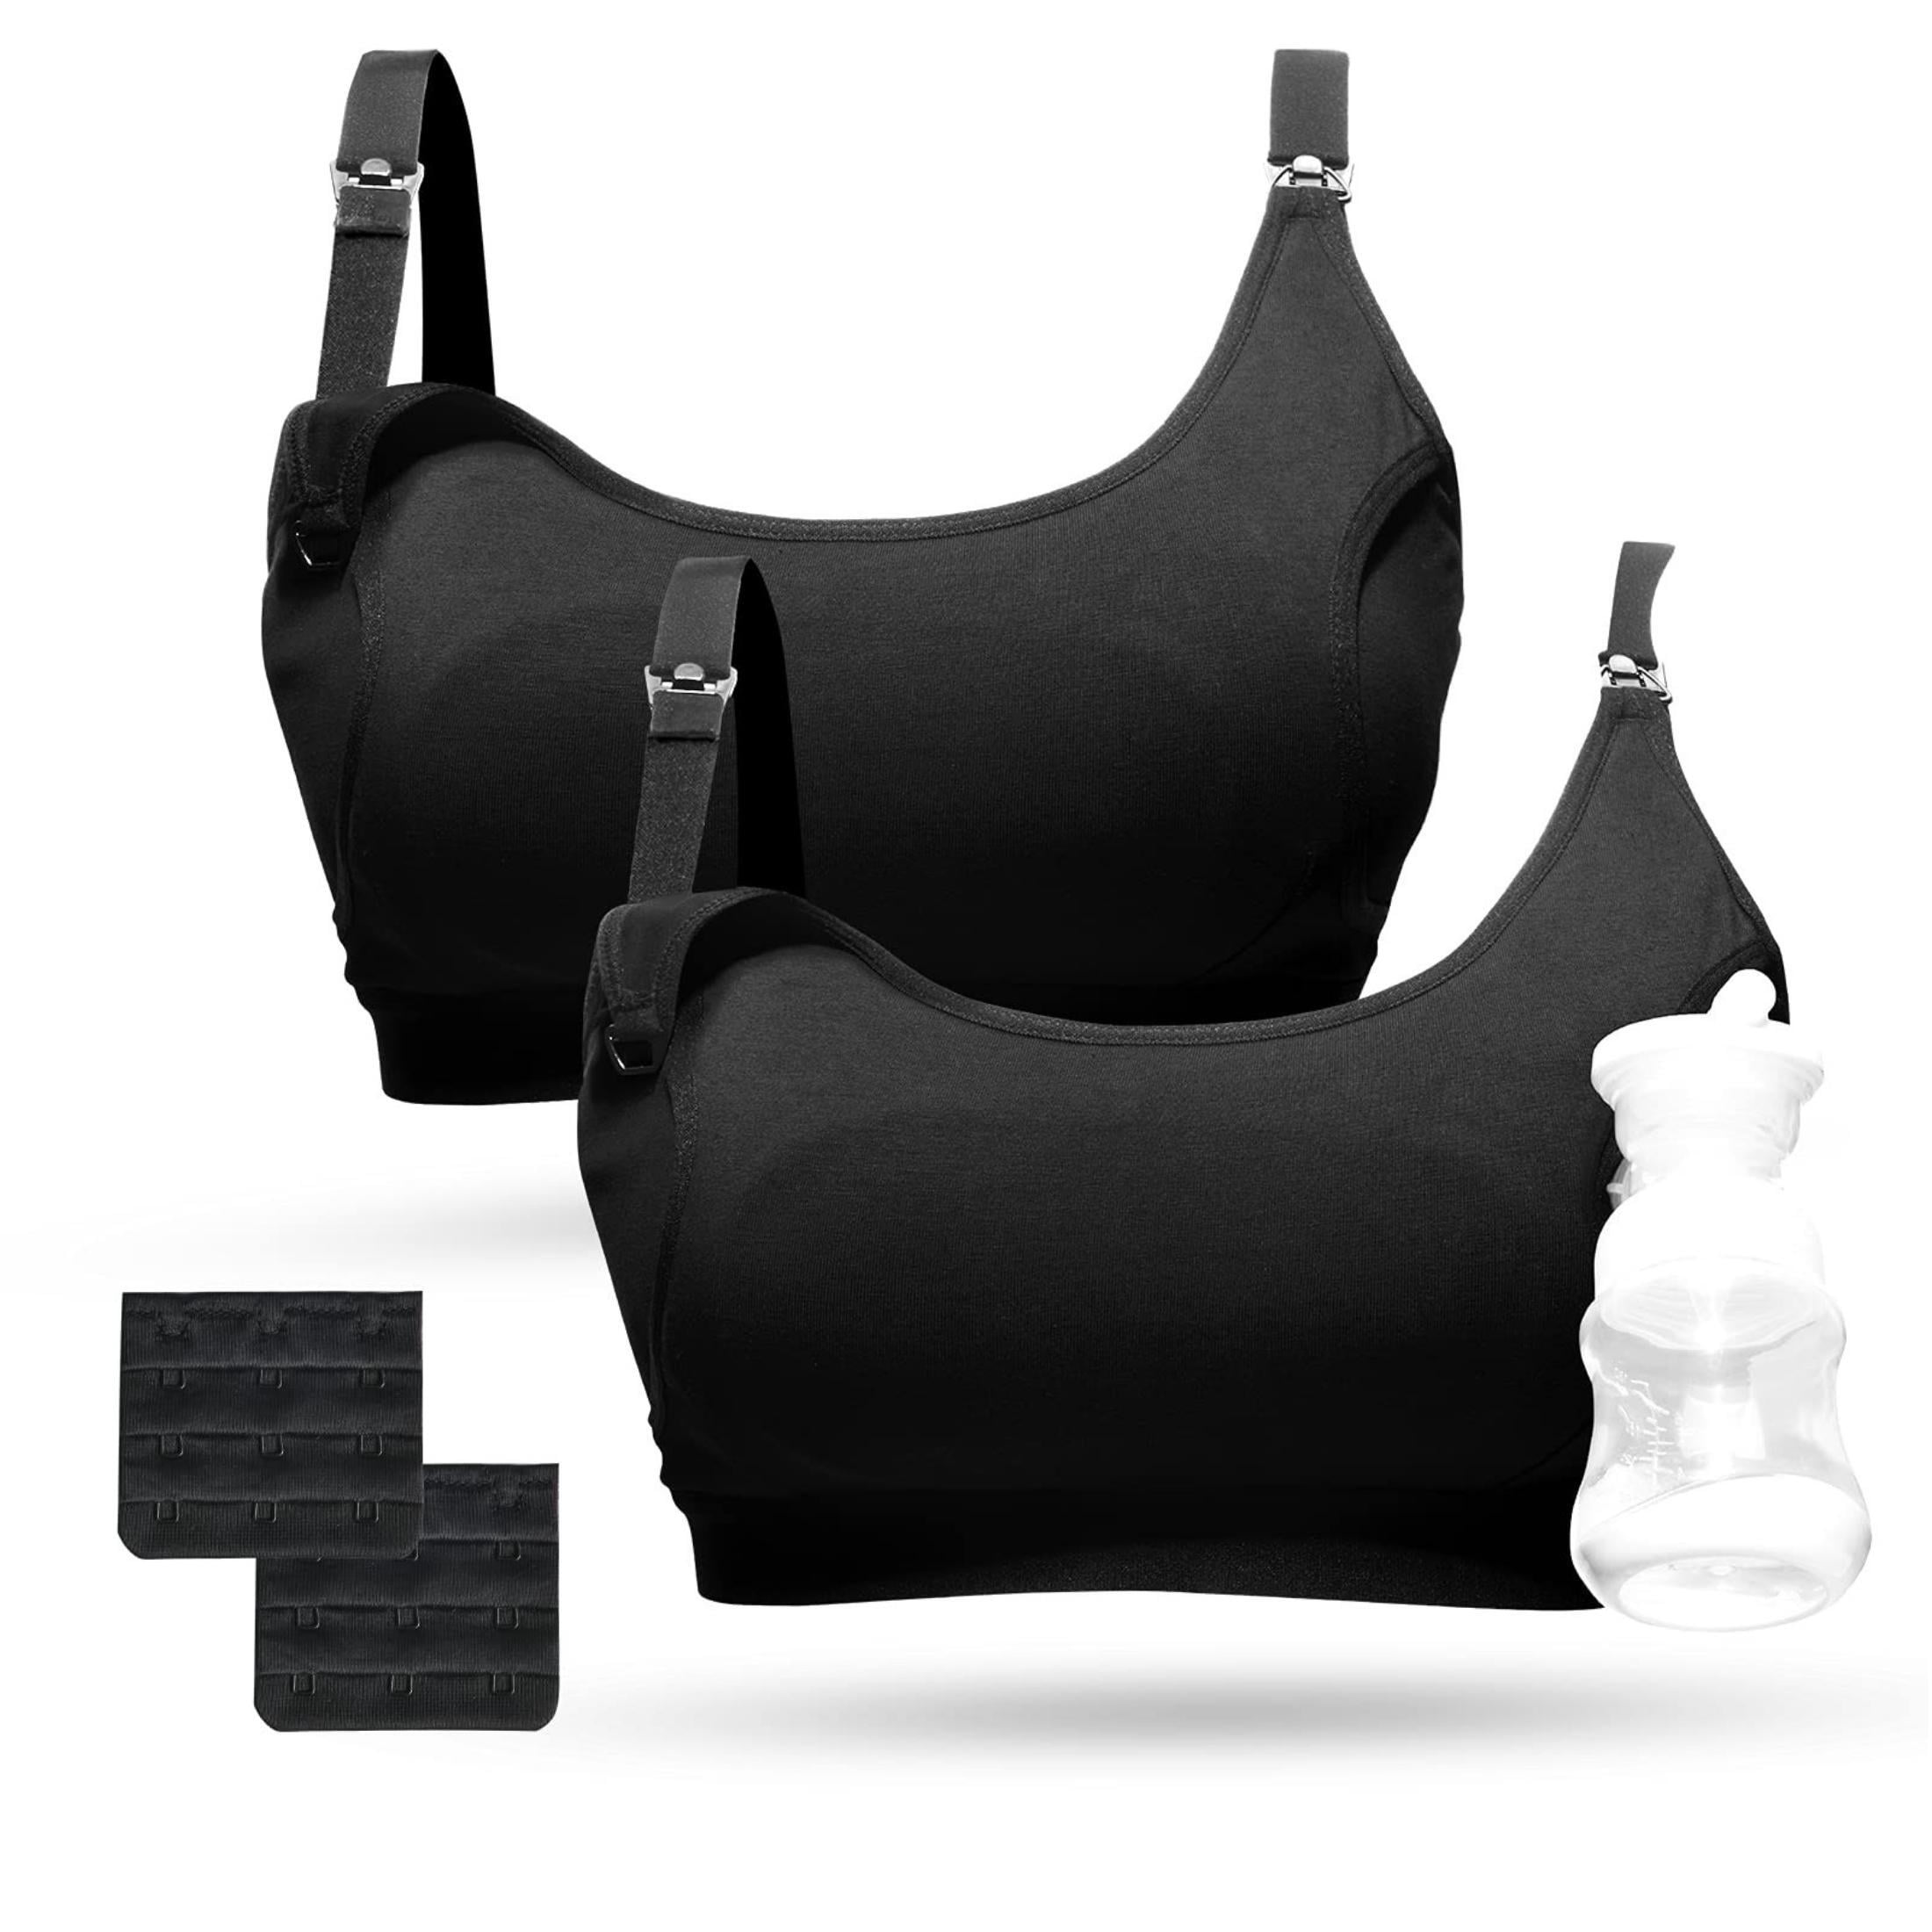 Hands Free Pumping Bra, Momcozy Adjustable Breast-Pump Holding and